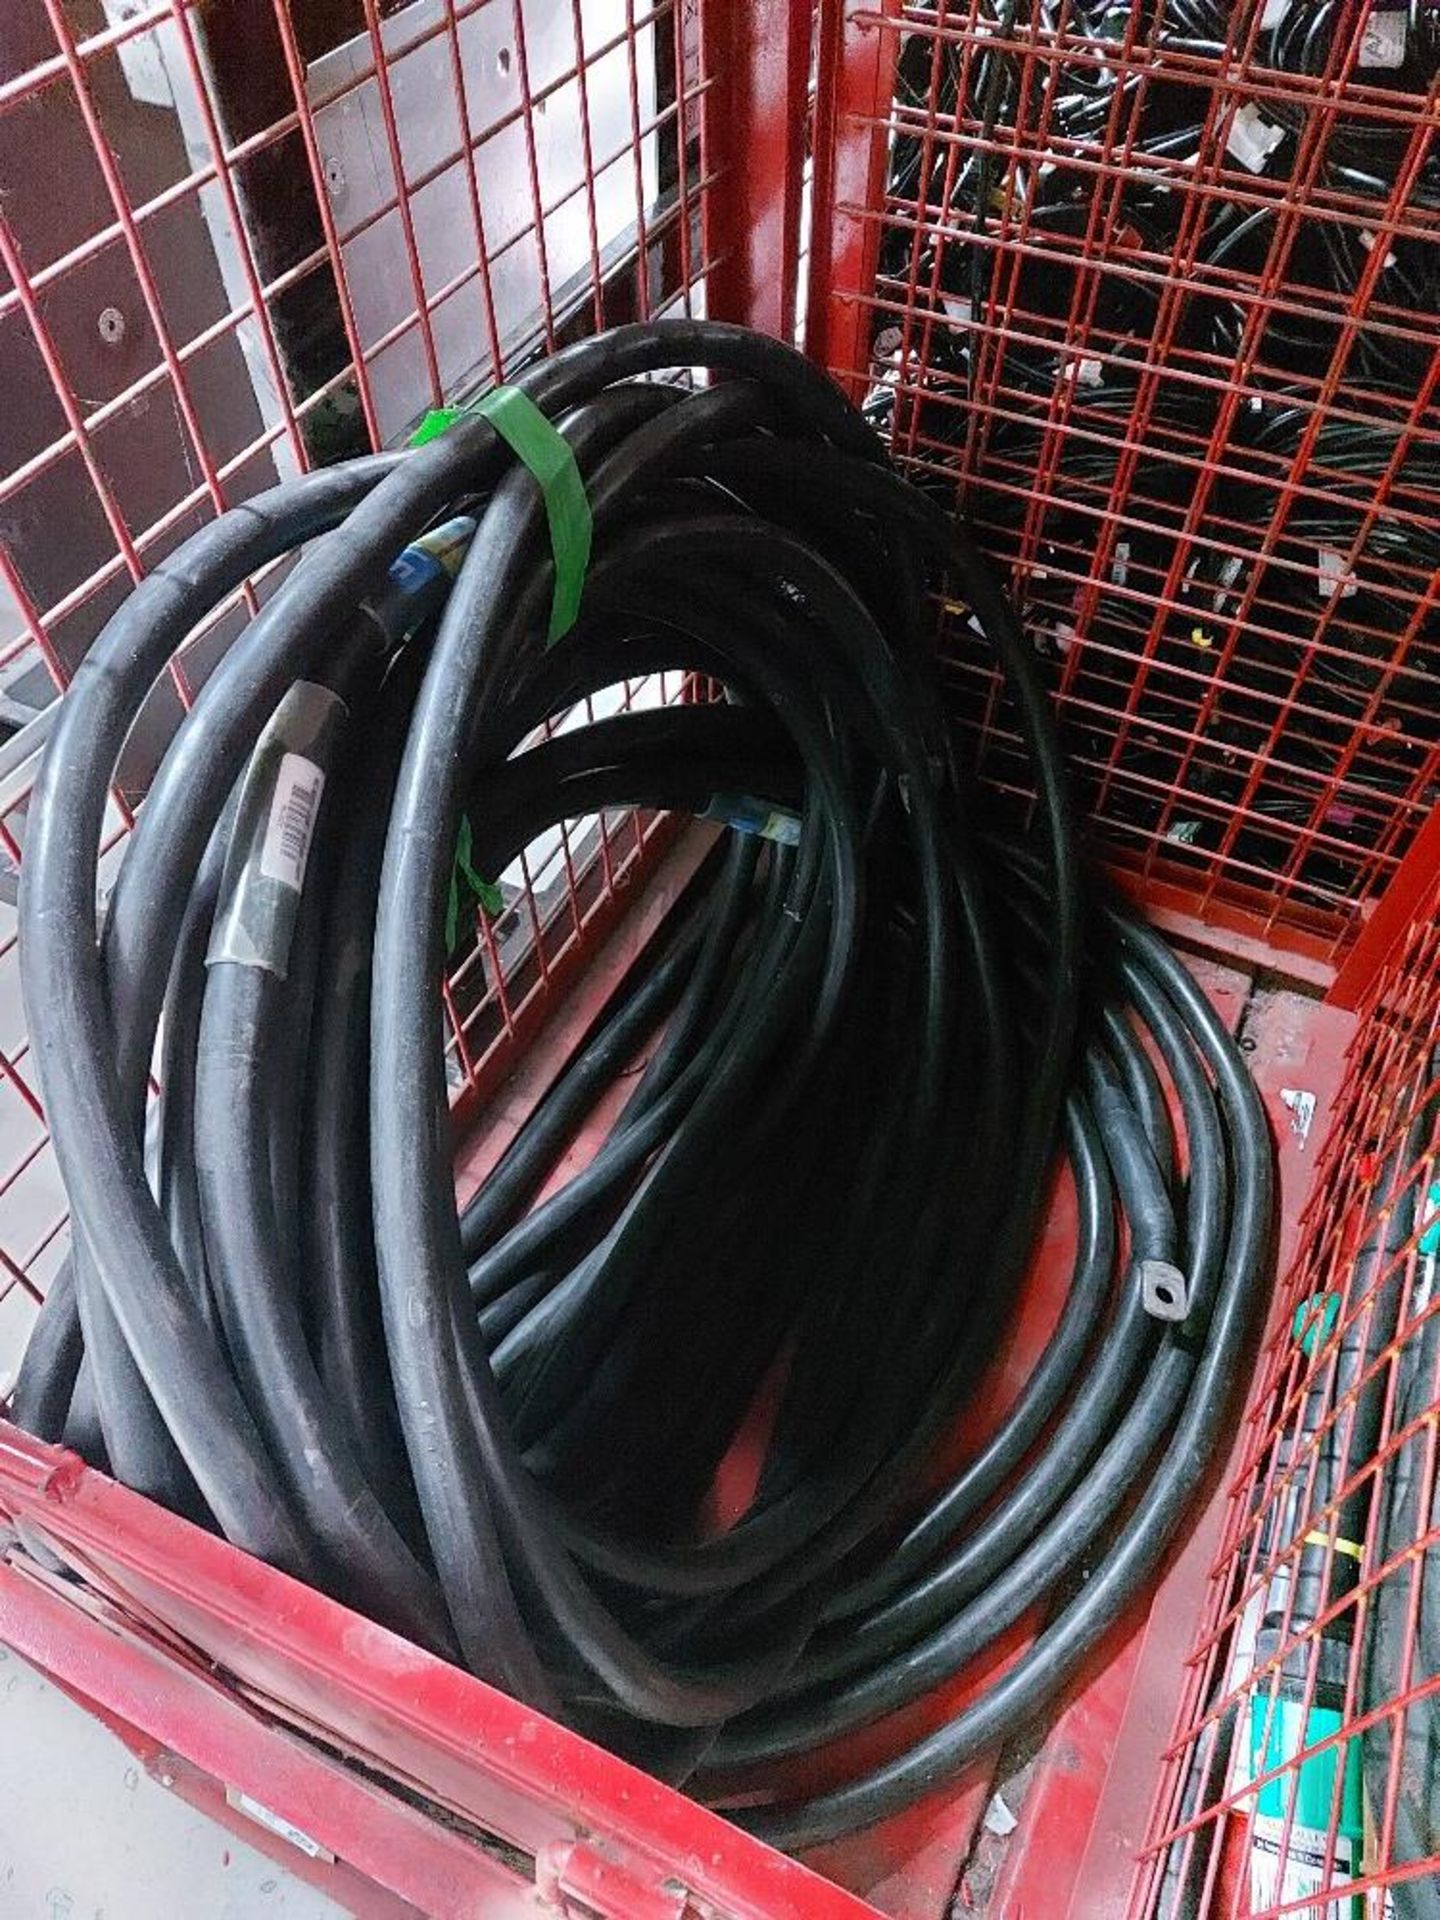 Large Quantity of 1.5m 5 Core Powerlock Cable Set M-F with Steel Fabricated Stillage - Image 2 of 4